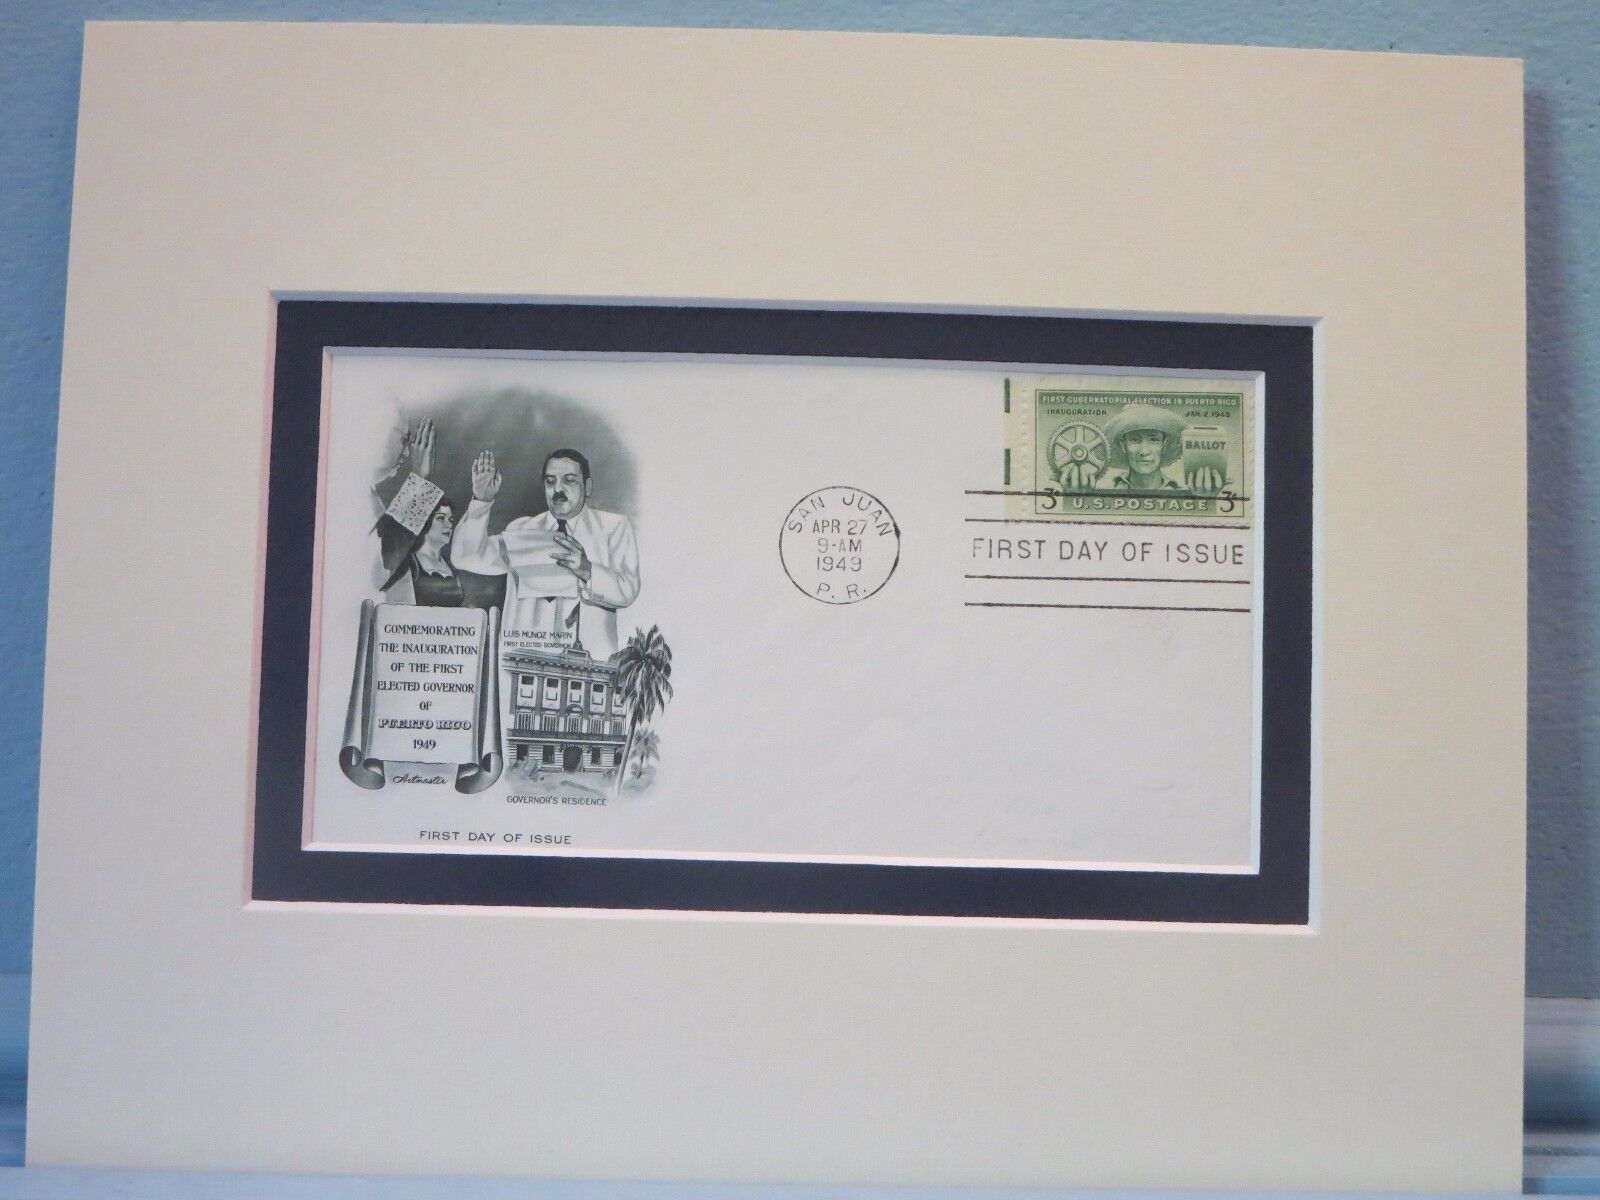 Puerto Rico - Its First Gubernatorial Election in 1948 & First Day Cover 